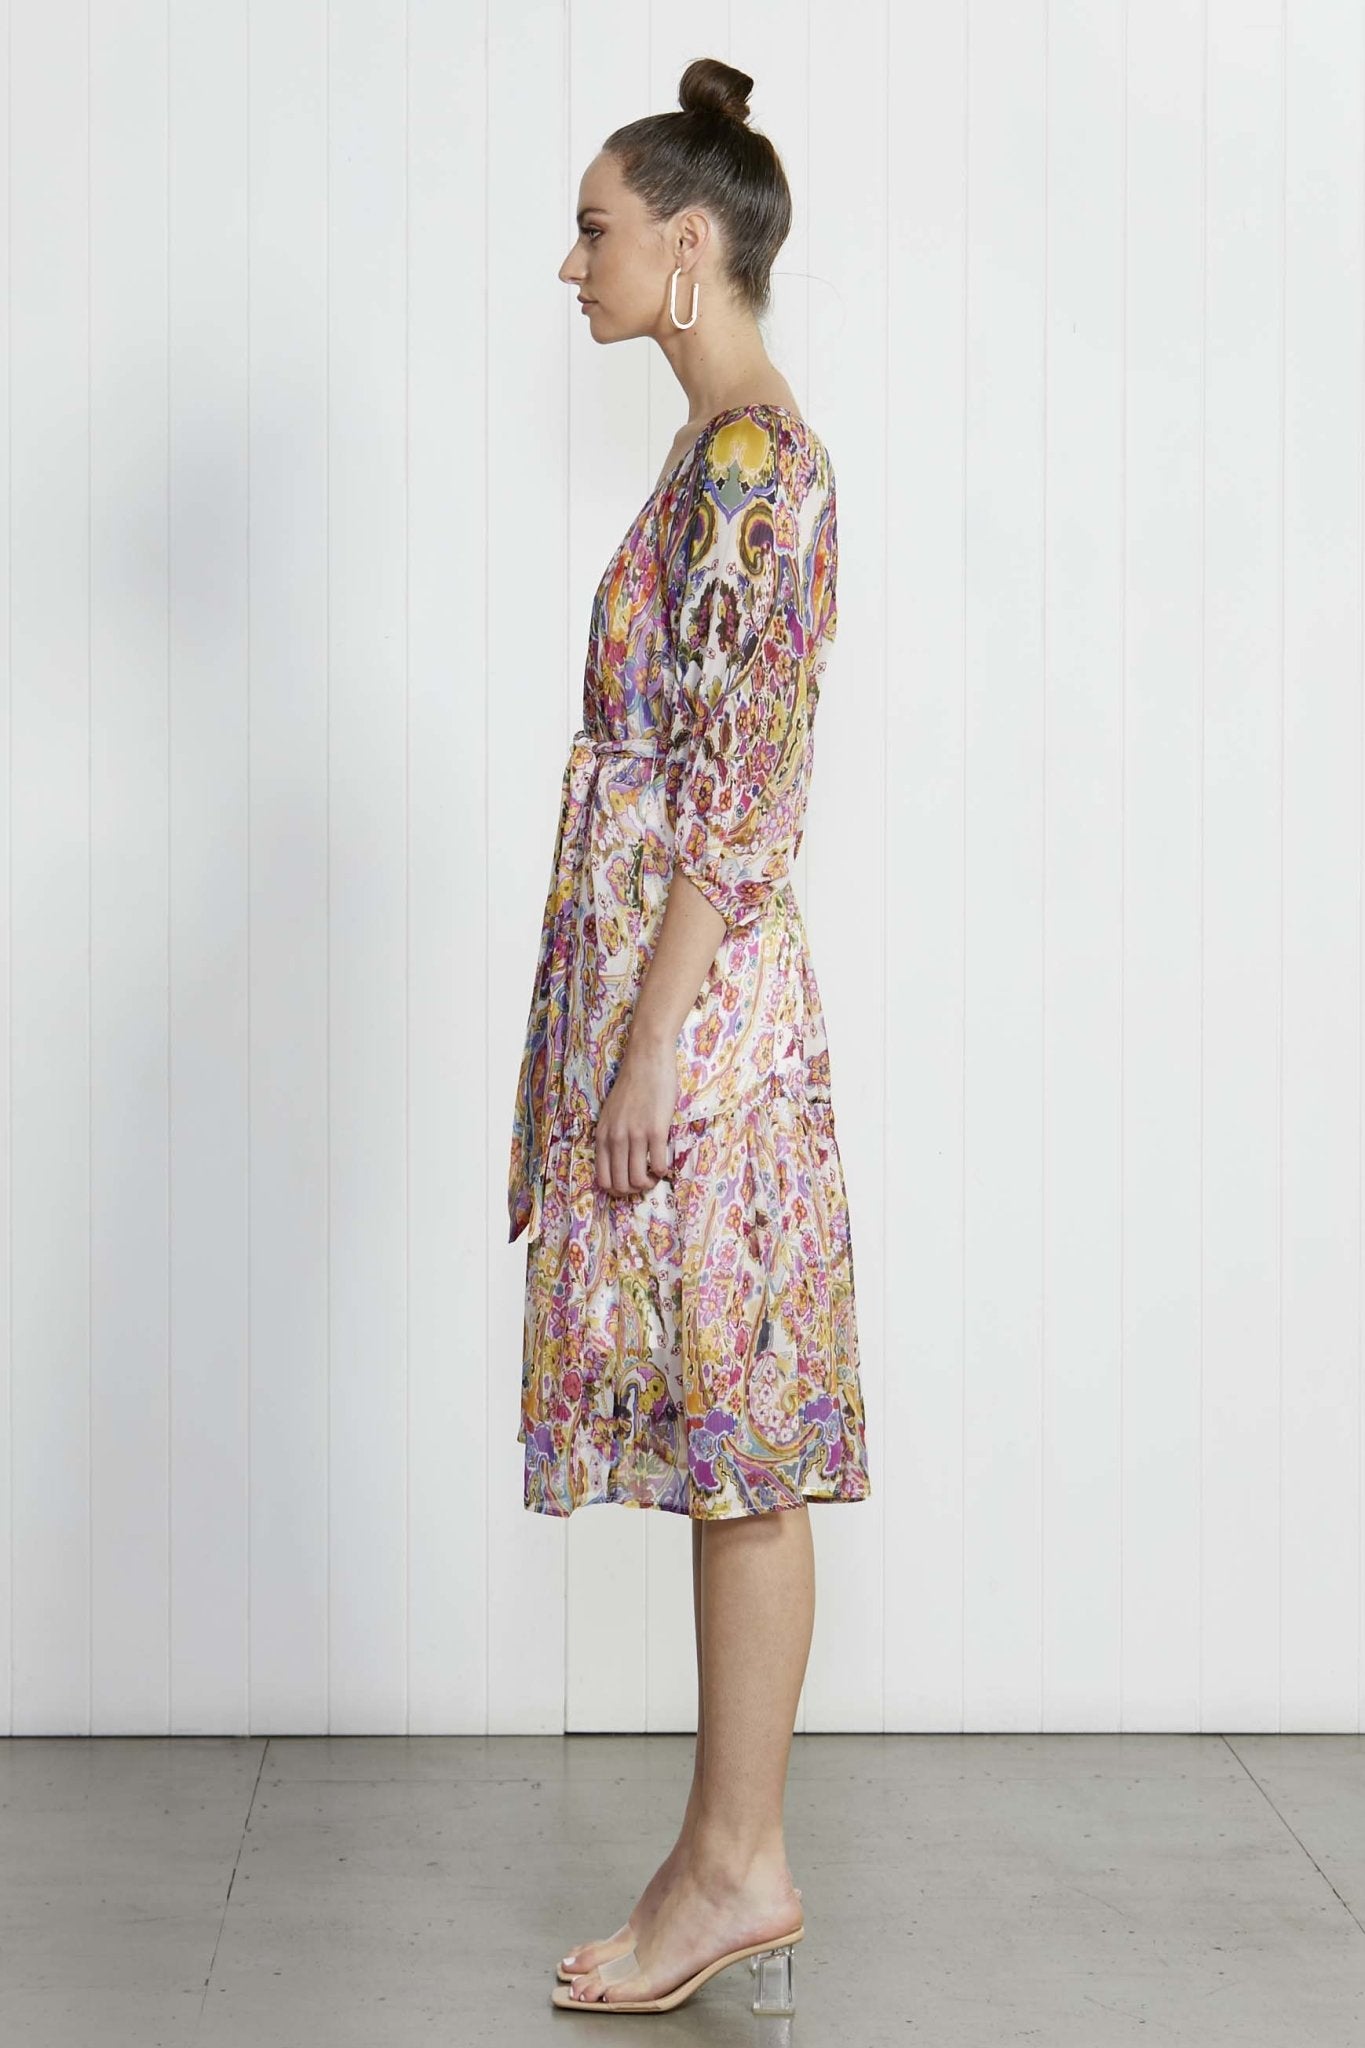 Fate + Becker Joy in Repetition Dress in Paisley - Hey Sara